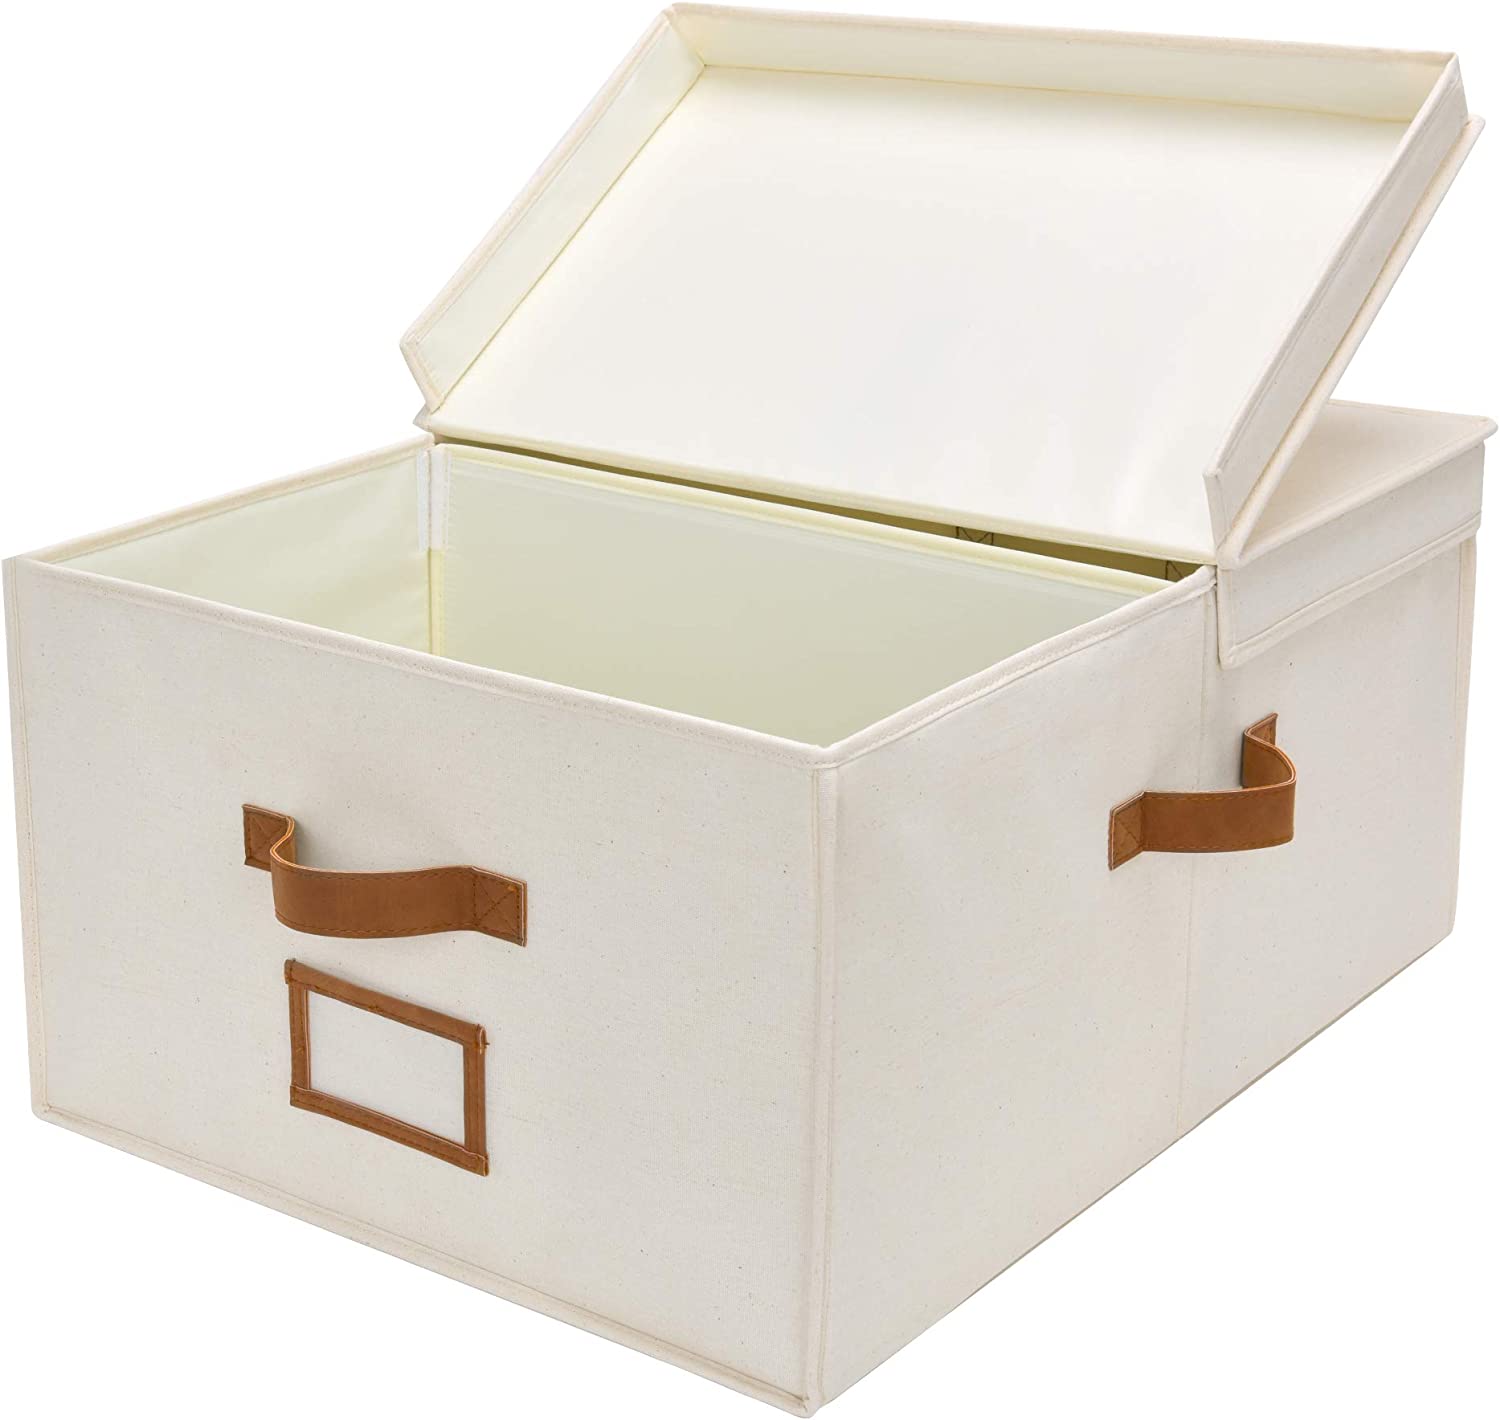 5-wter-proof-fabric-storages-box-with-lids